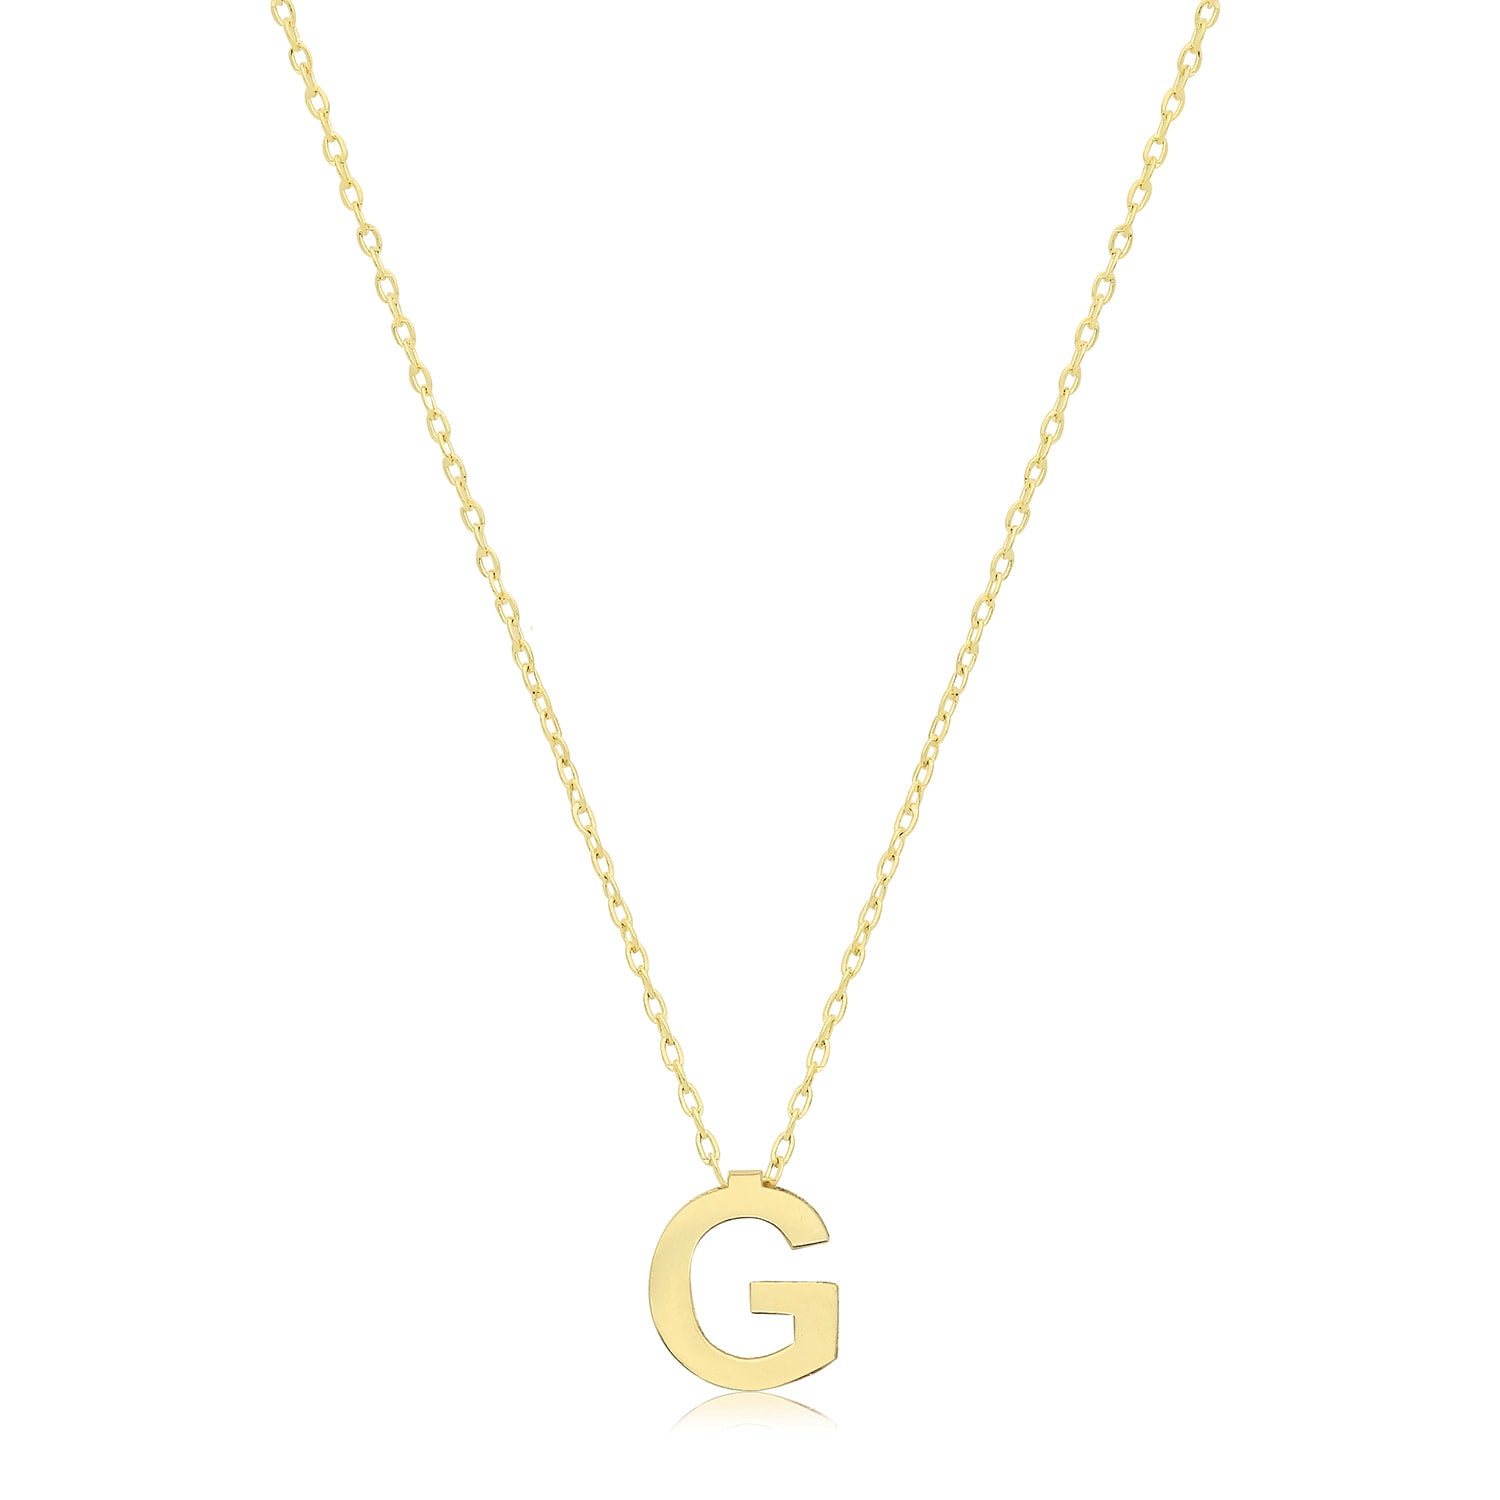 Buy ELLIPSTORE Initial Necklace with Premium 18K Gold Plating,  Statement/Minimal Jewelry, Necklace for girls and women(G) at Amazon.in